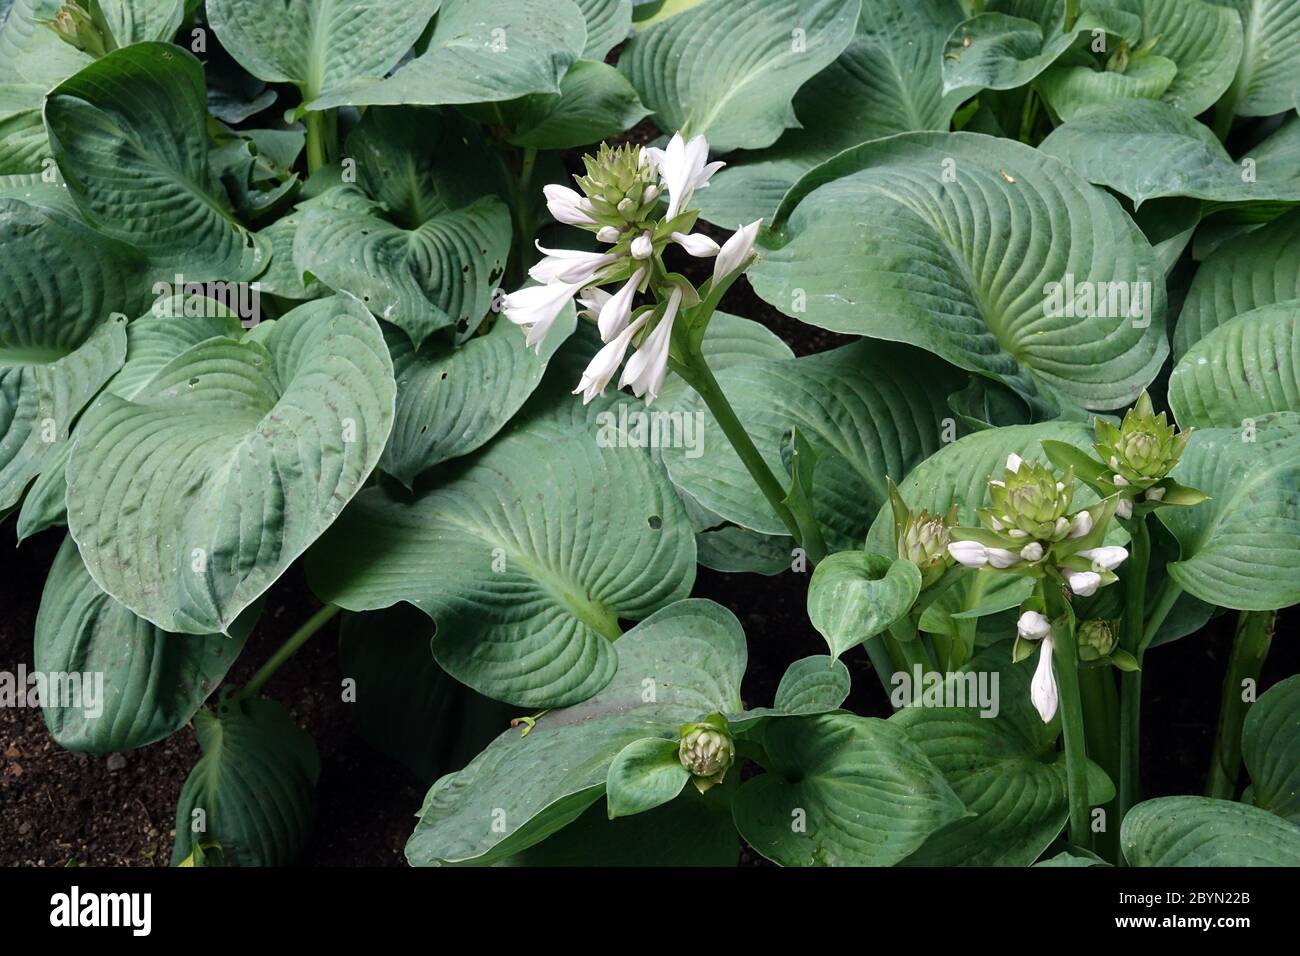 Hosta 'Mississippi Delta' flowers Plantain Lily with large leaves in garden Stock Photo